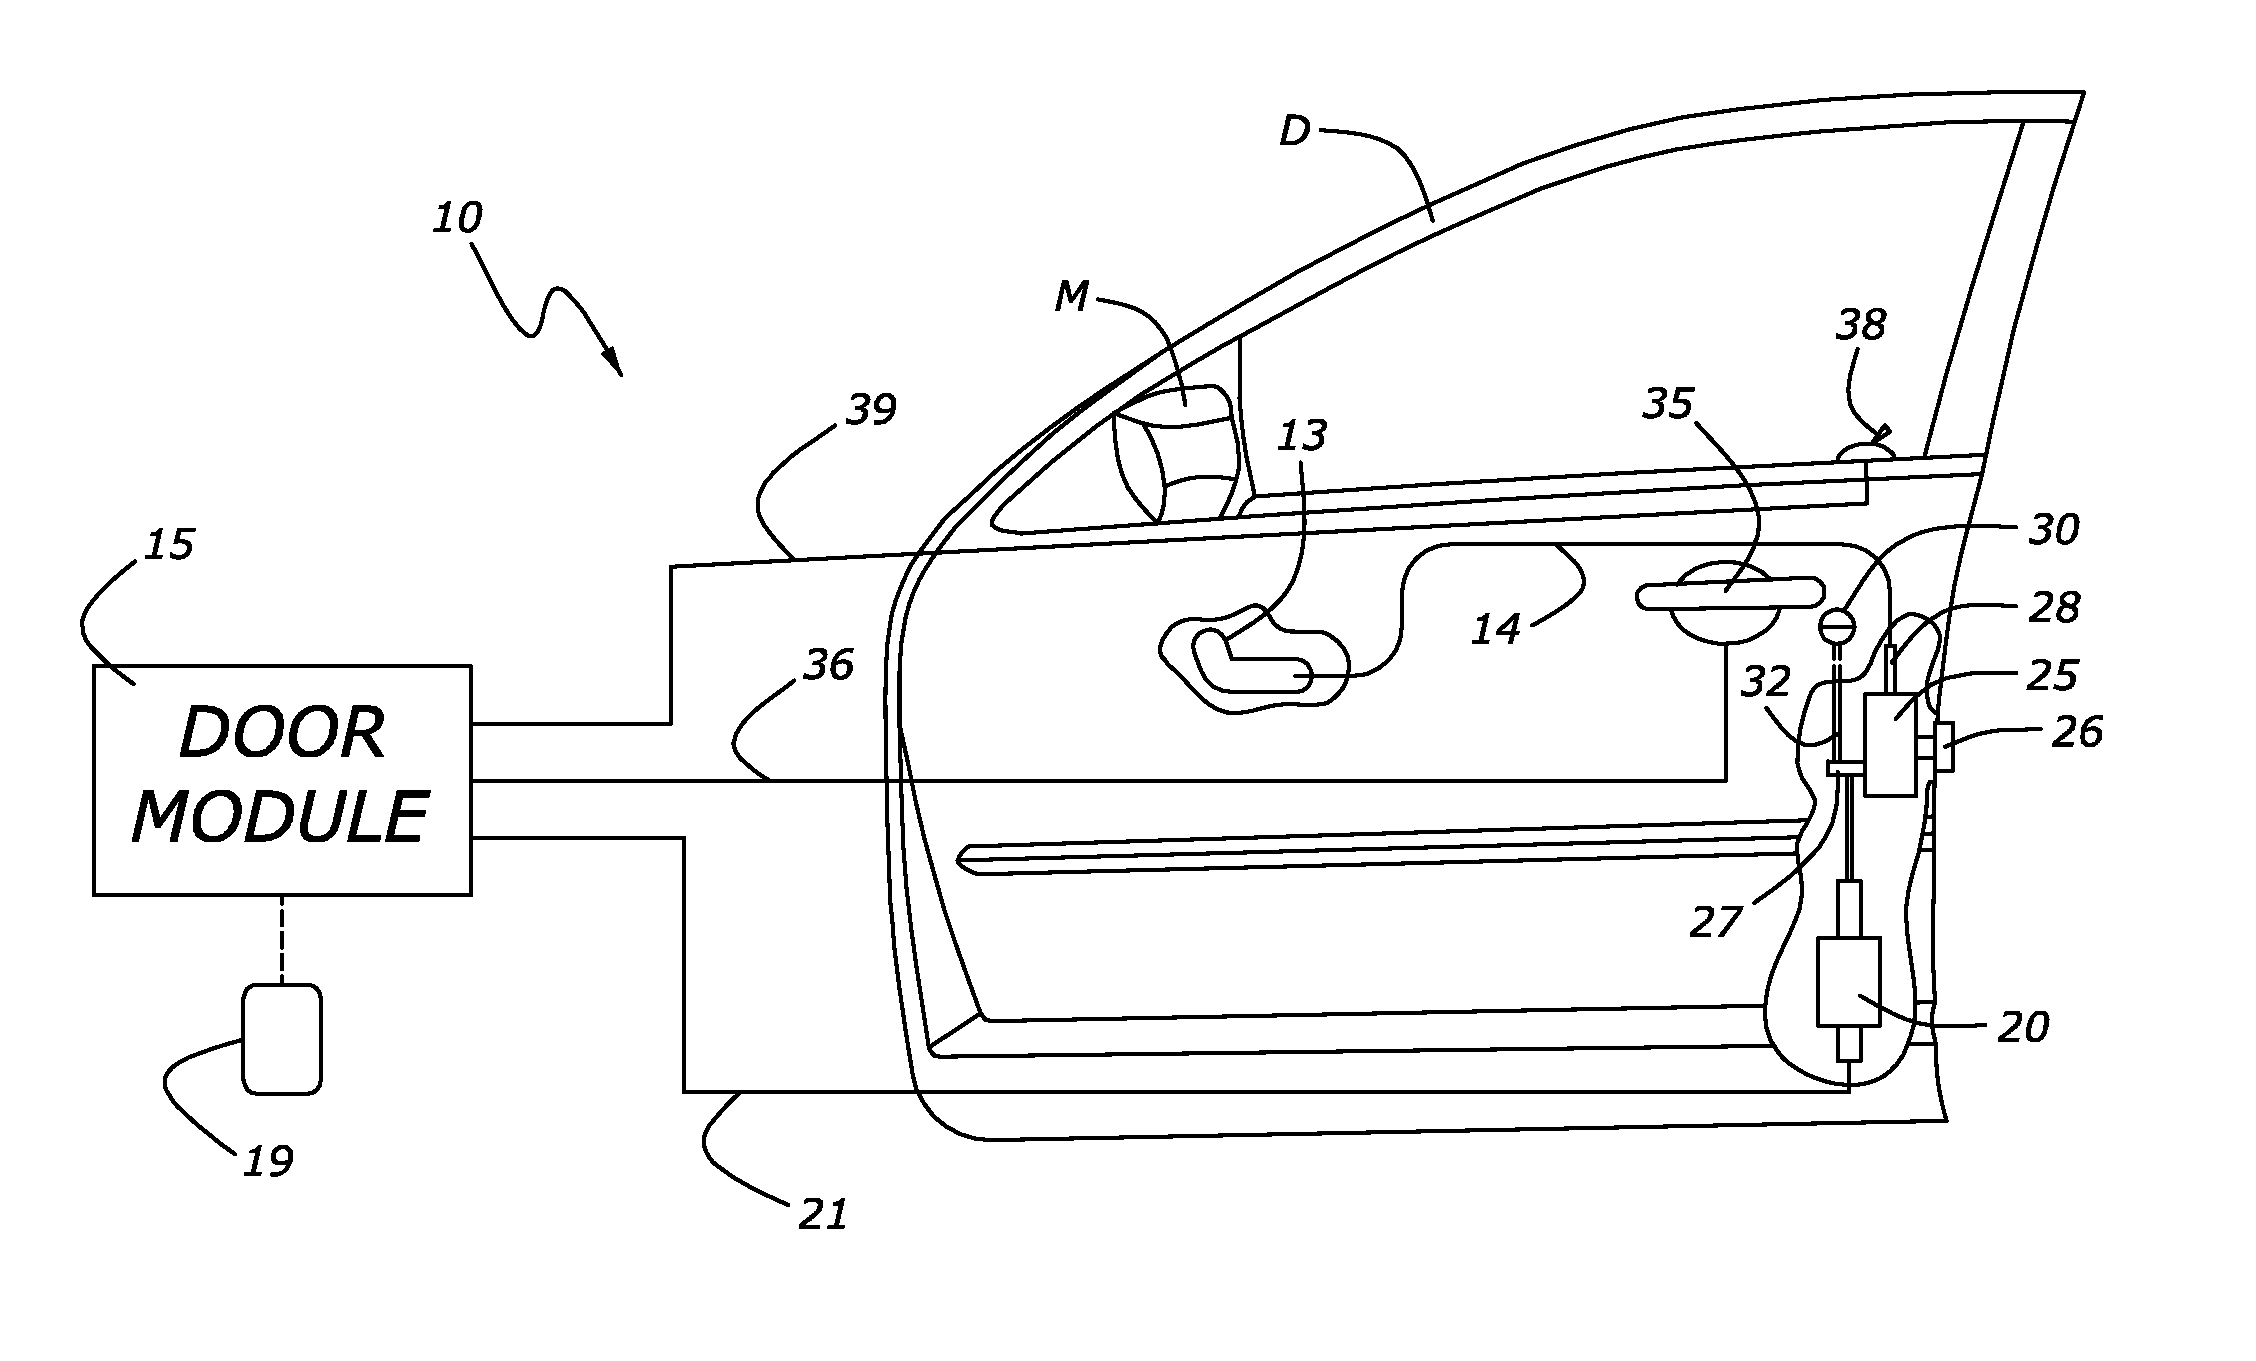 Passive entry system for automotive vehicle doors